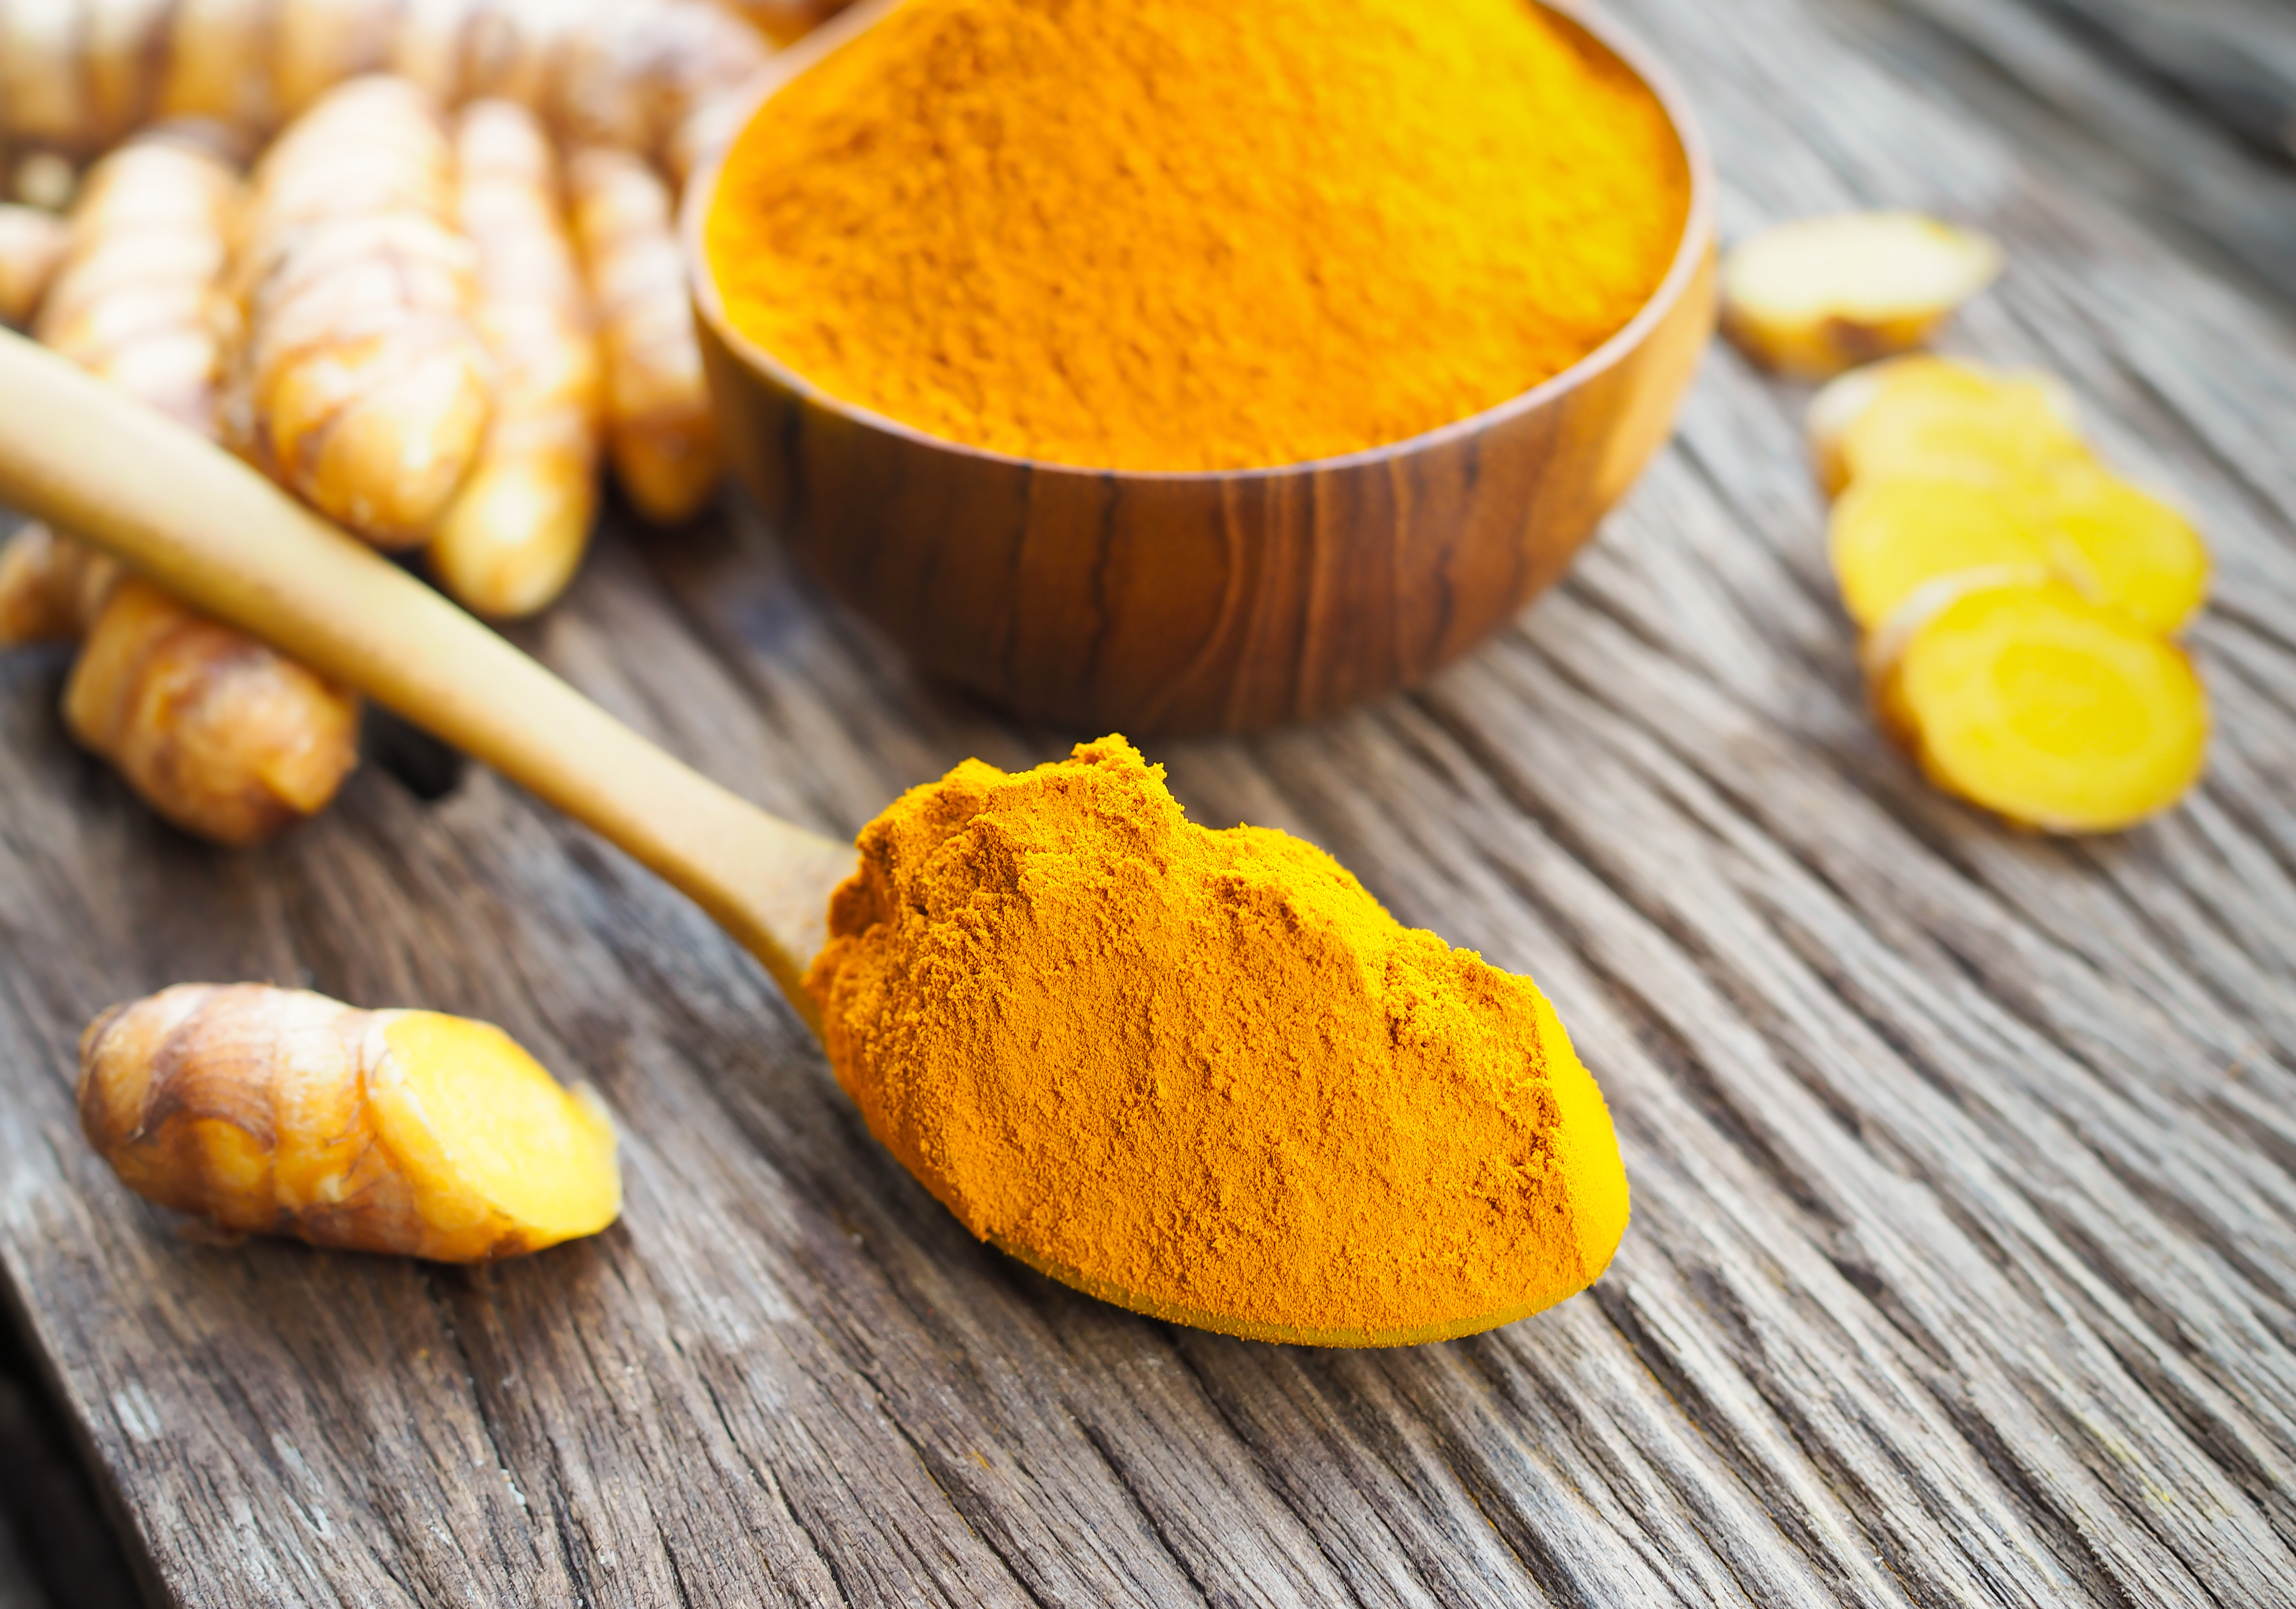 Should You Take Turmeric Supplements?